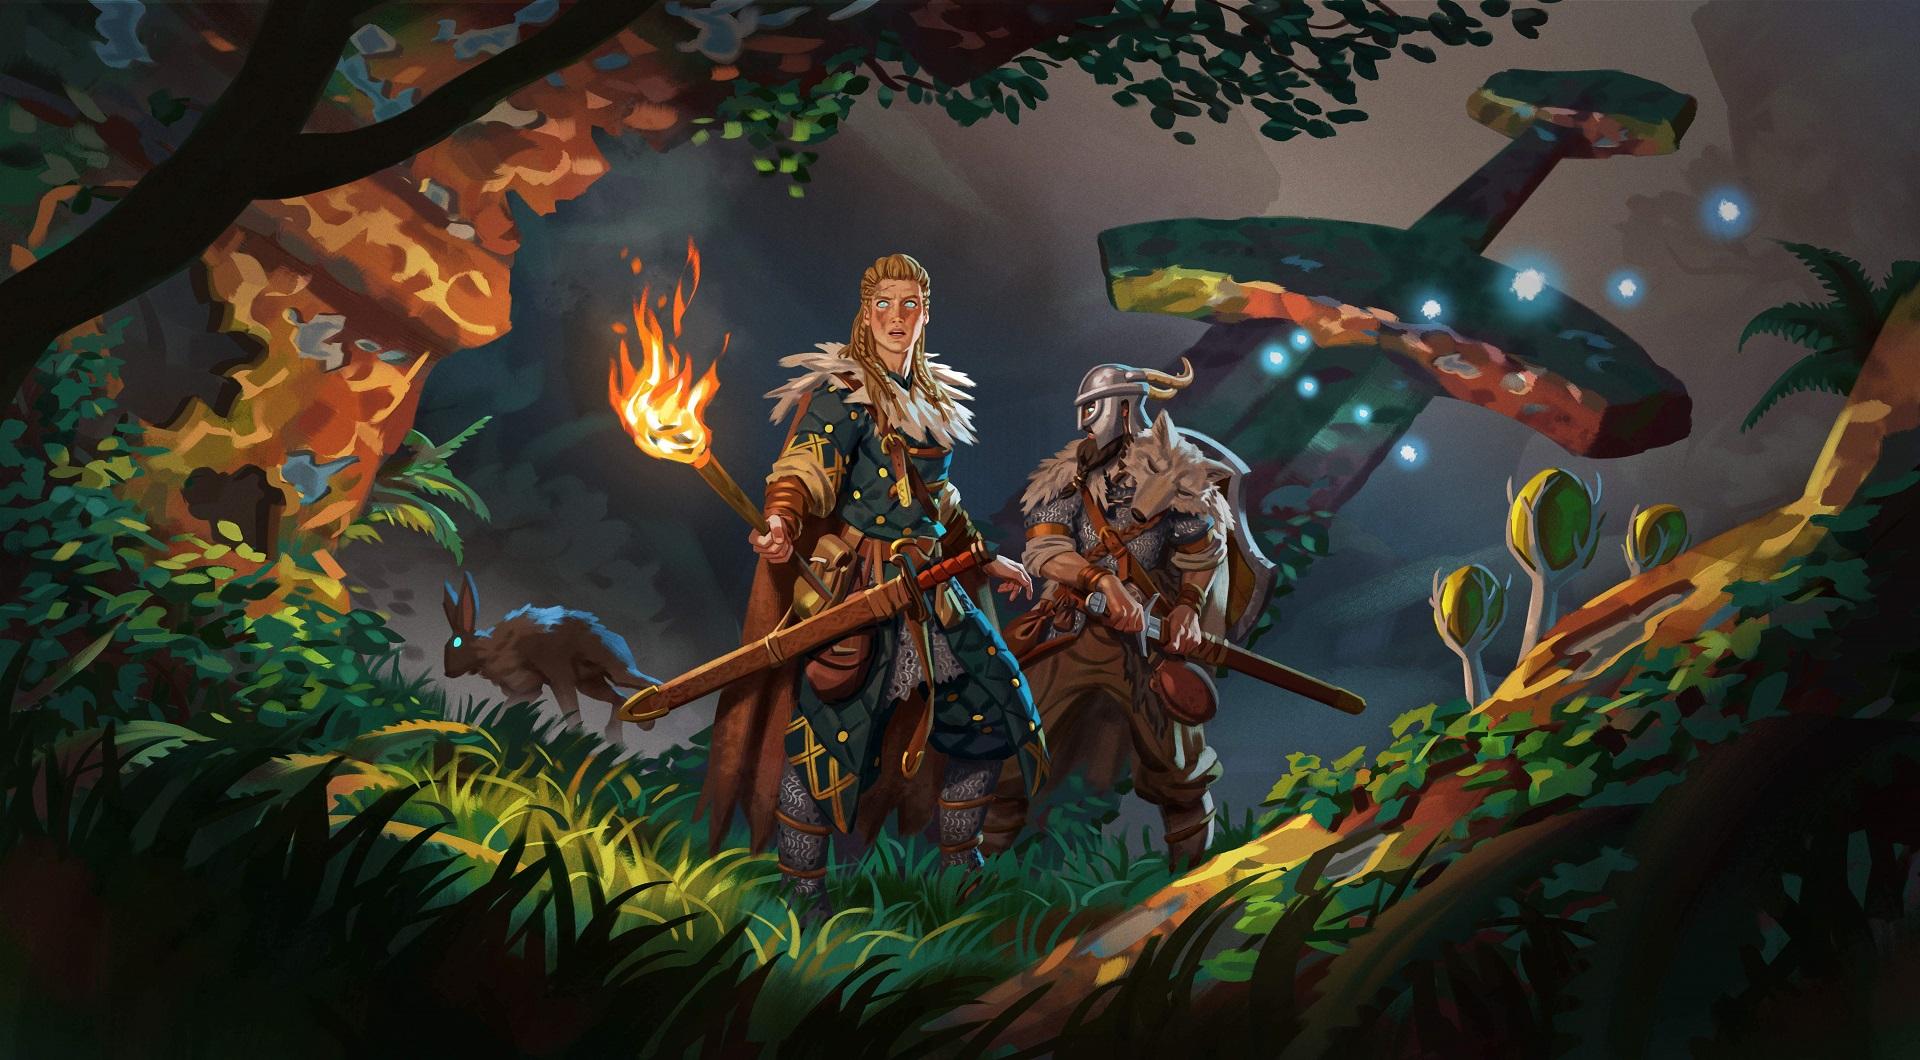 'Valheim' promo art showing two characters exploring a dark forest.